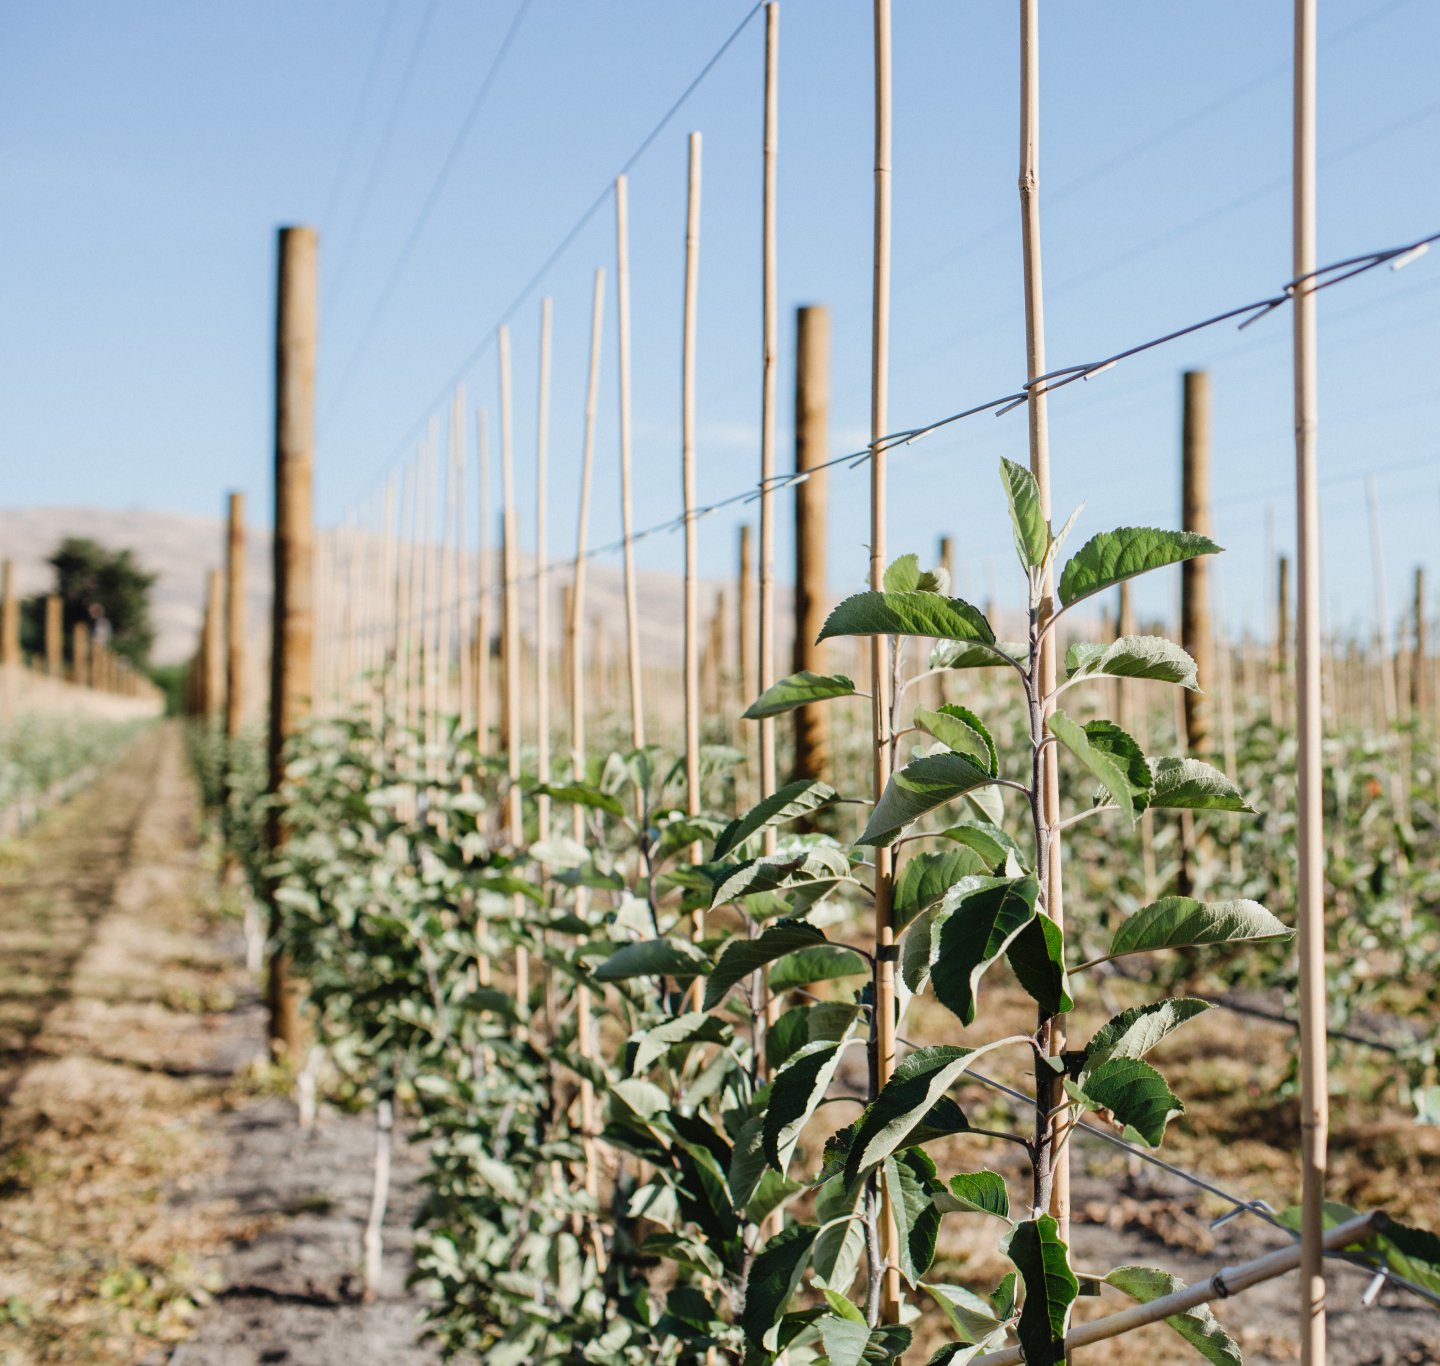 Young Rockit apple trees